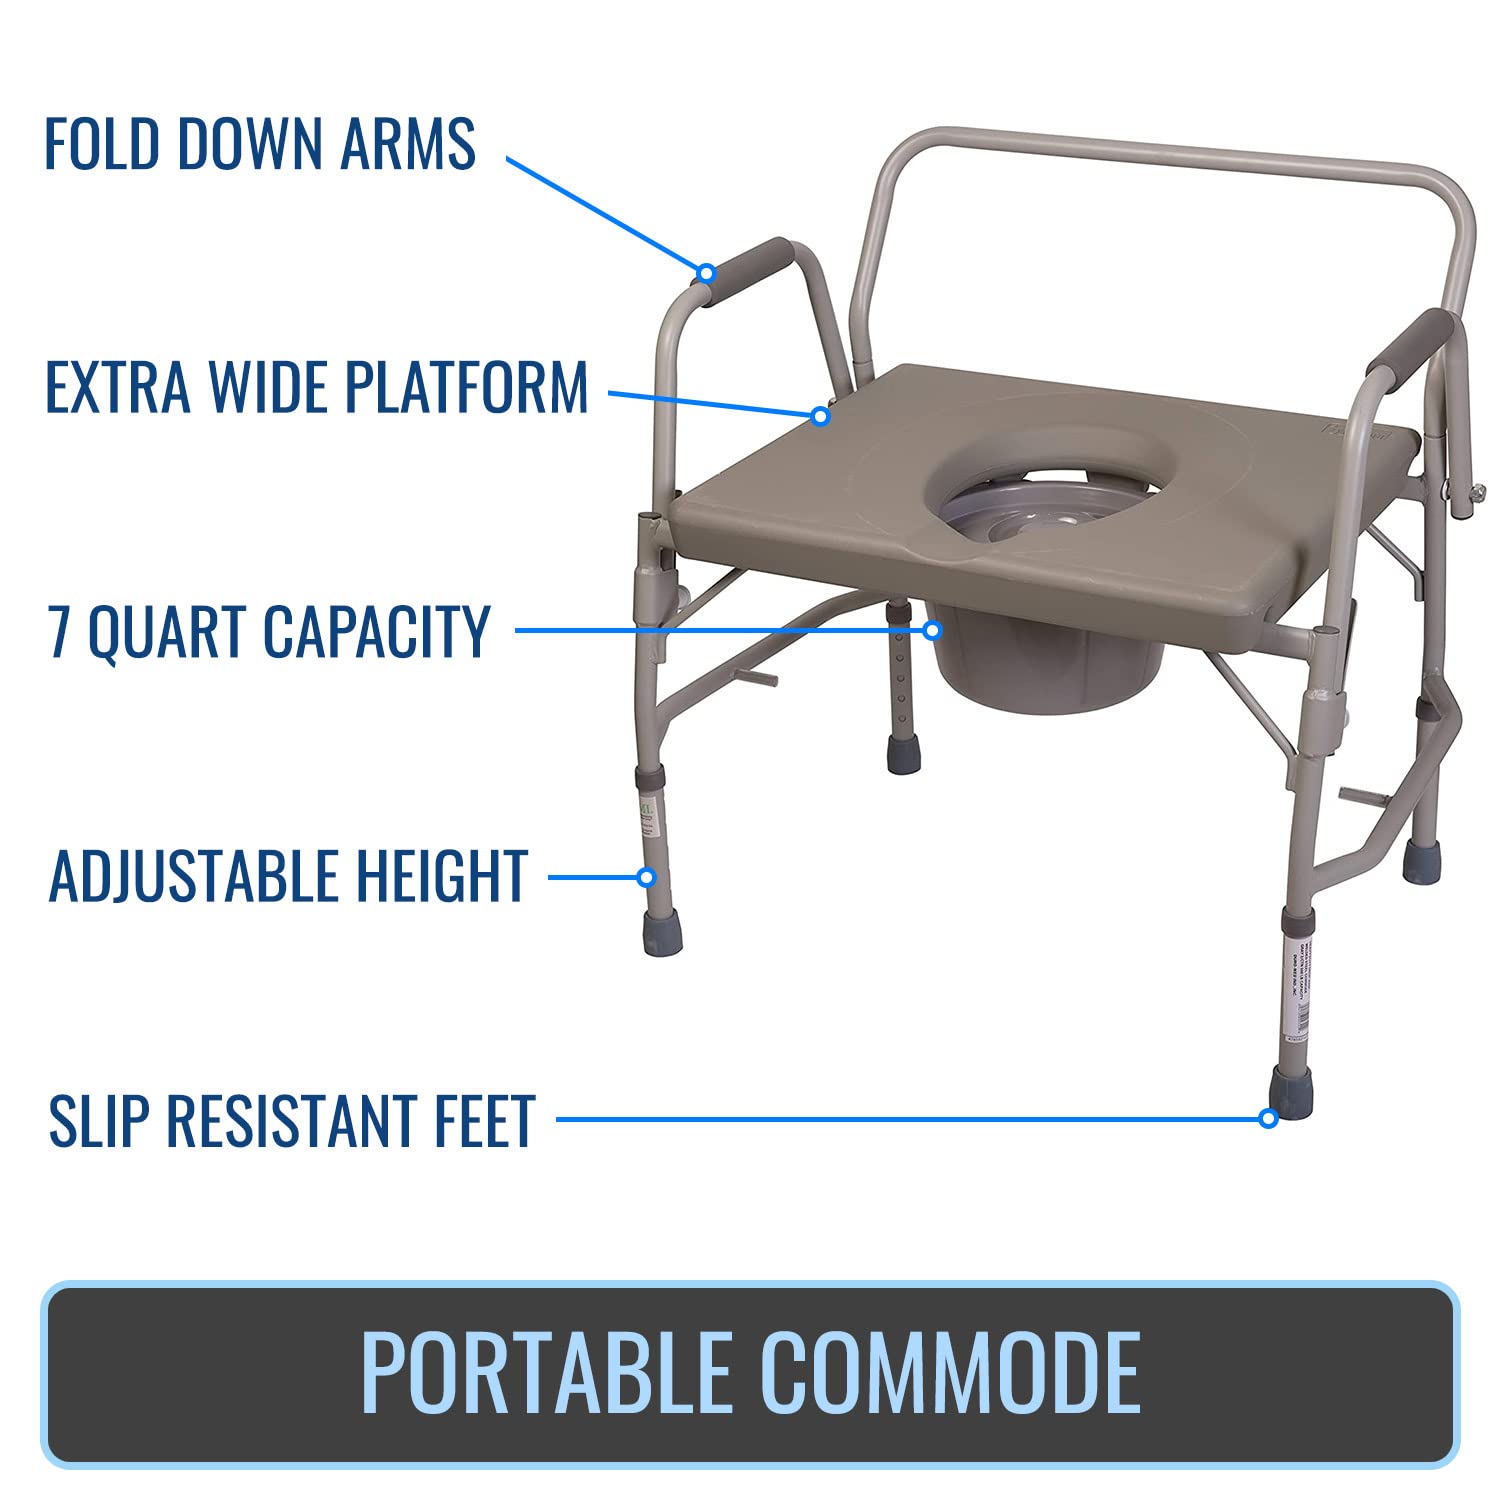 DMI Bedside Commode, Portable Toilet, Commode Chair, Raised Toilet Seat with Handles, Holds up to 500 Pounds with Included 7 qt Commode Bucket, Adjustable from 19-23 Inches, Extra Wide Commode